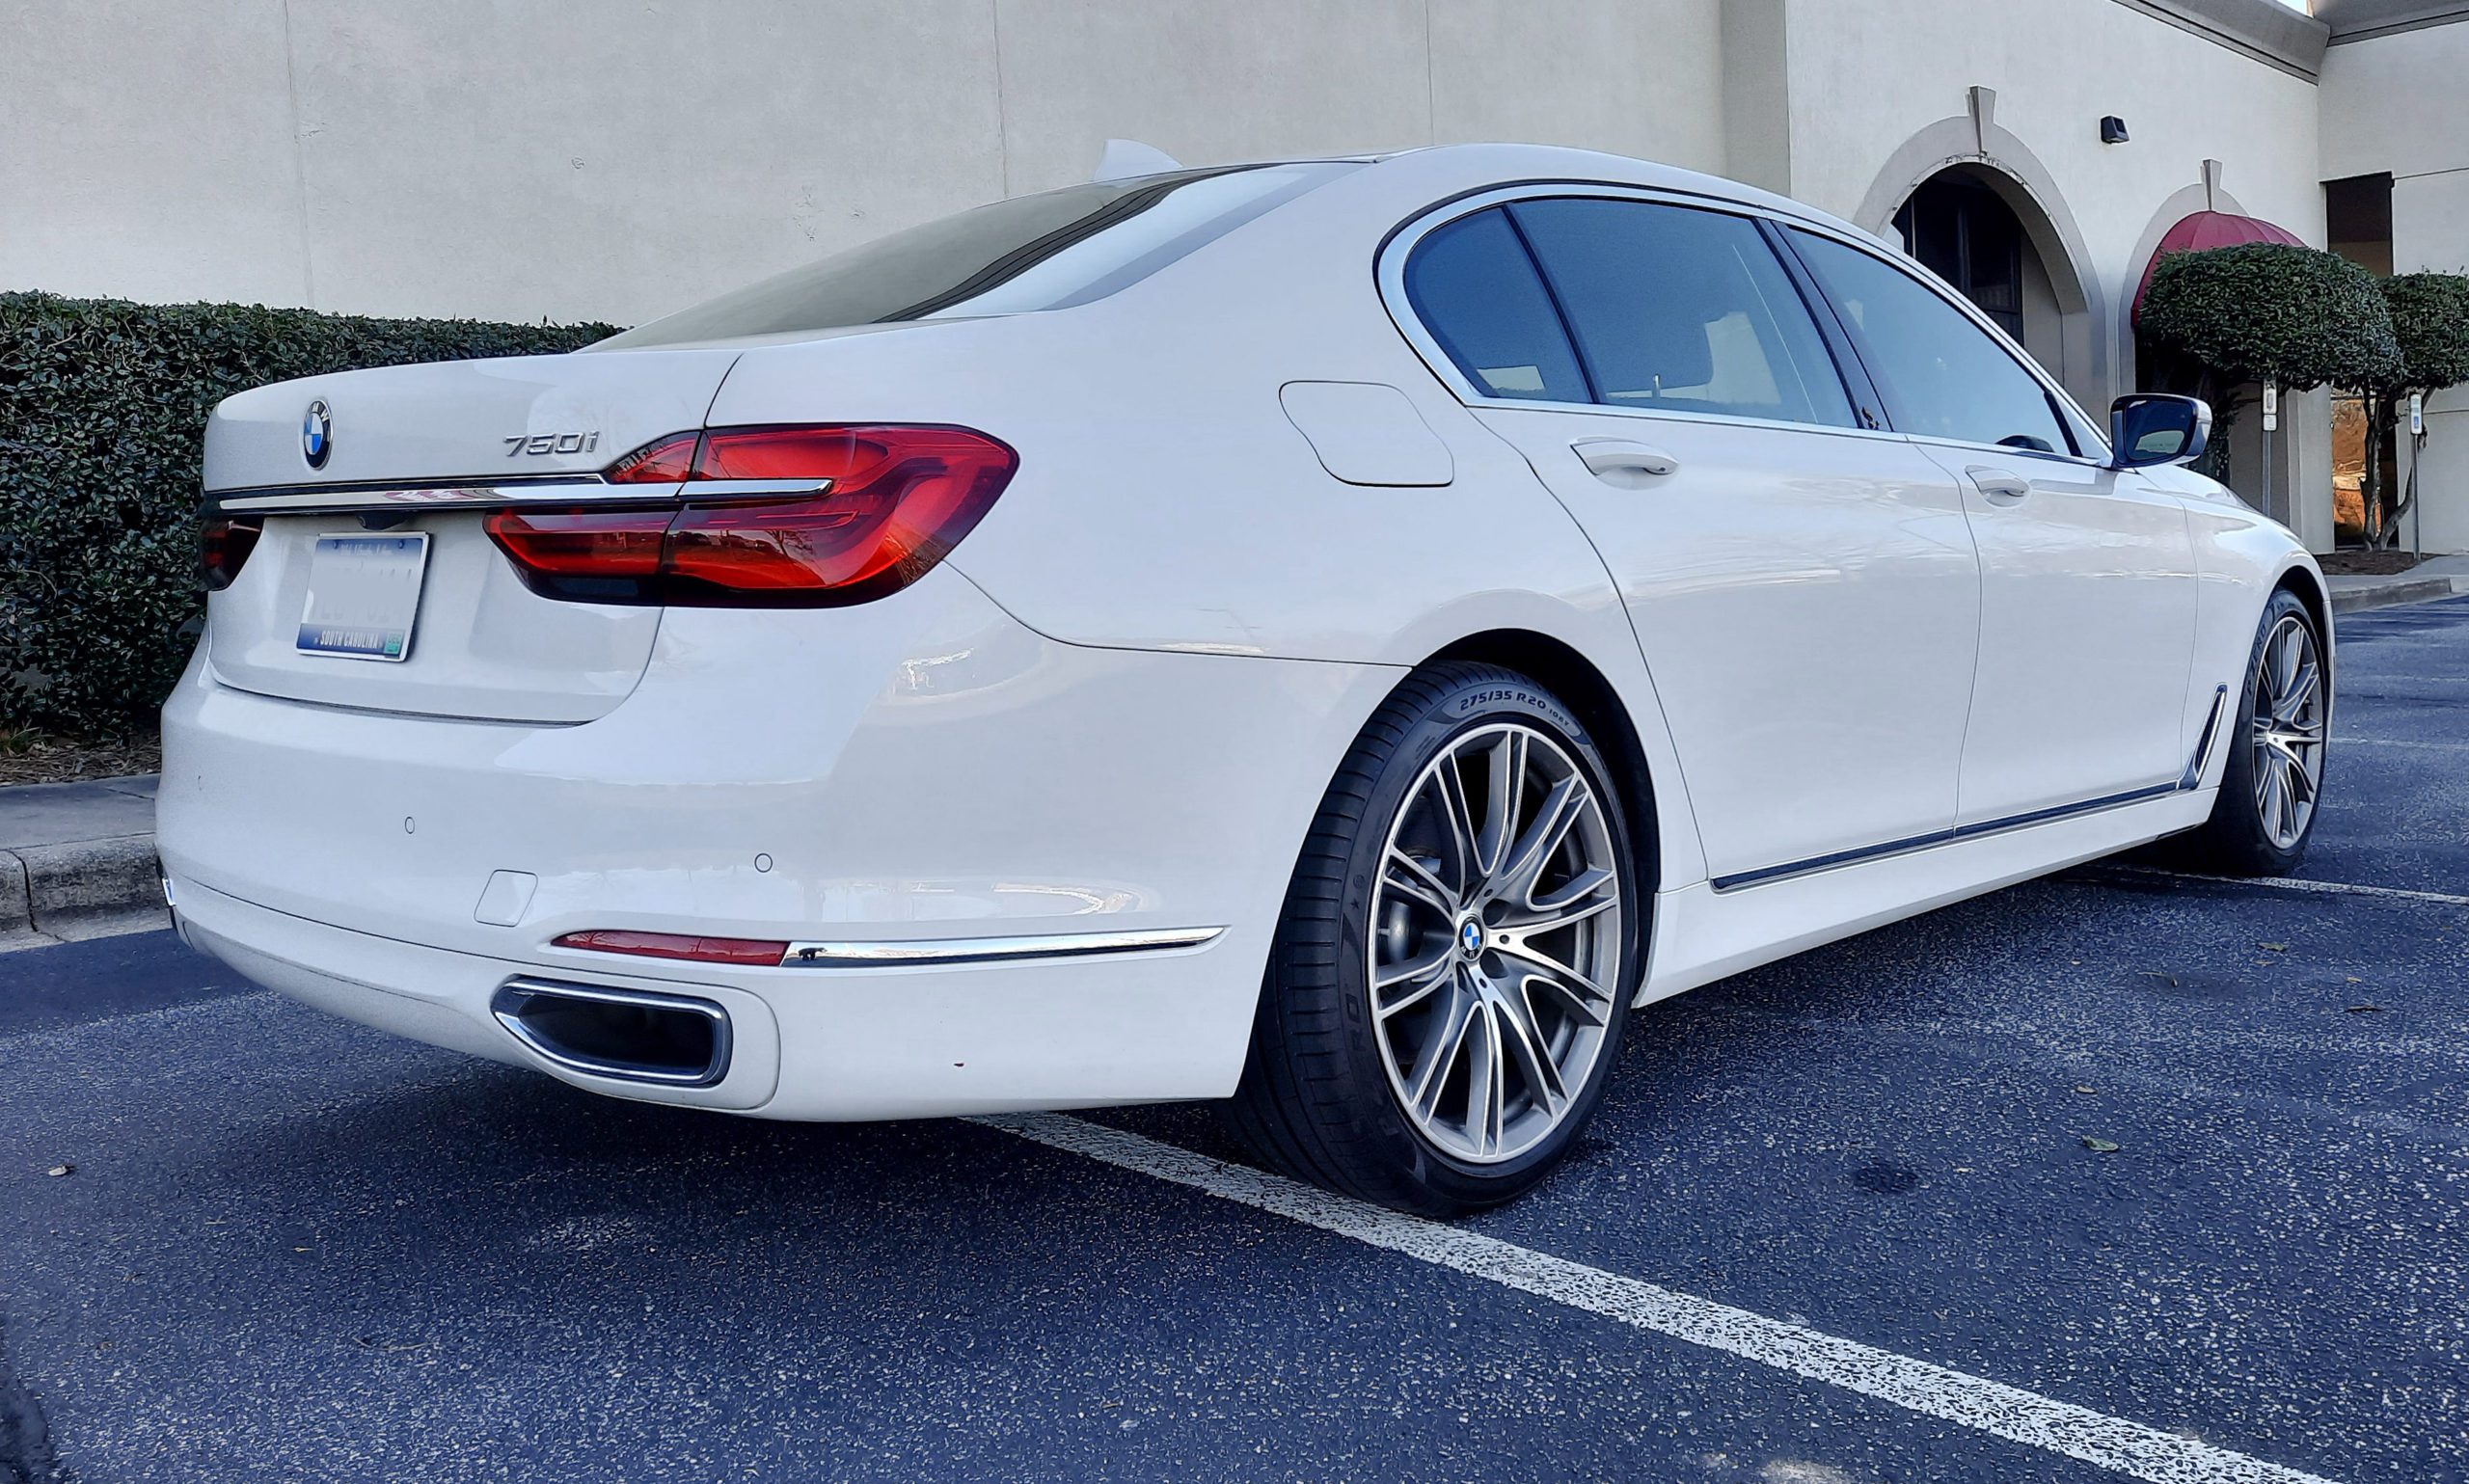 Photography of a BMW 750i for sale